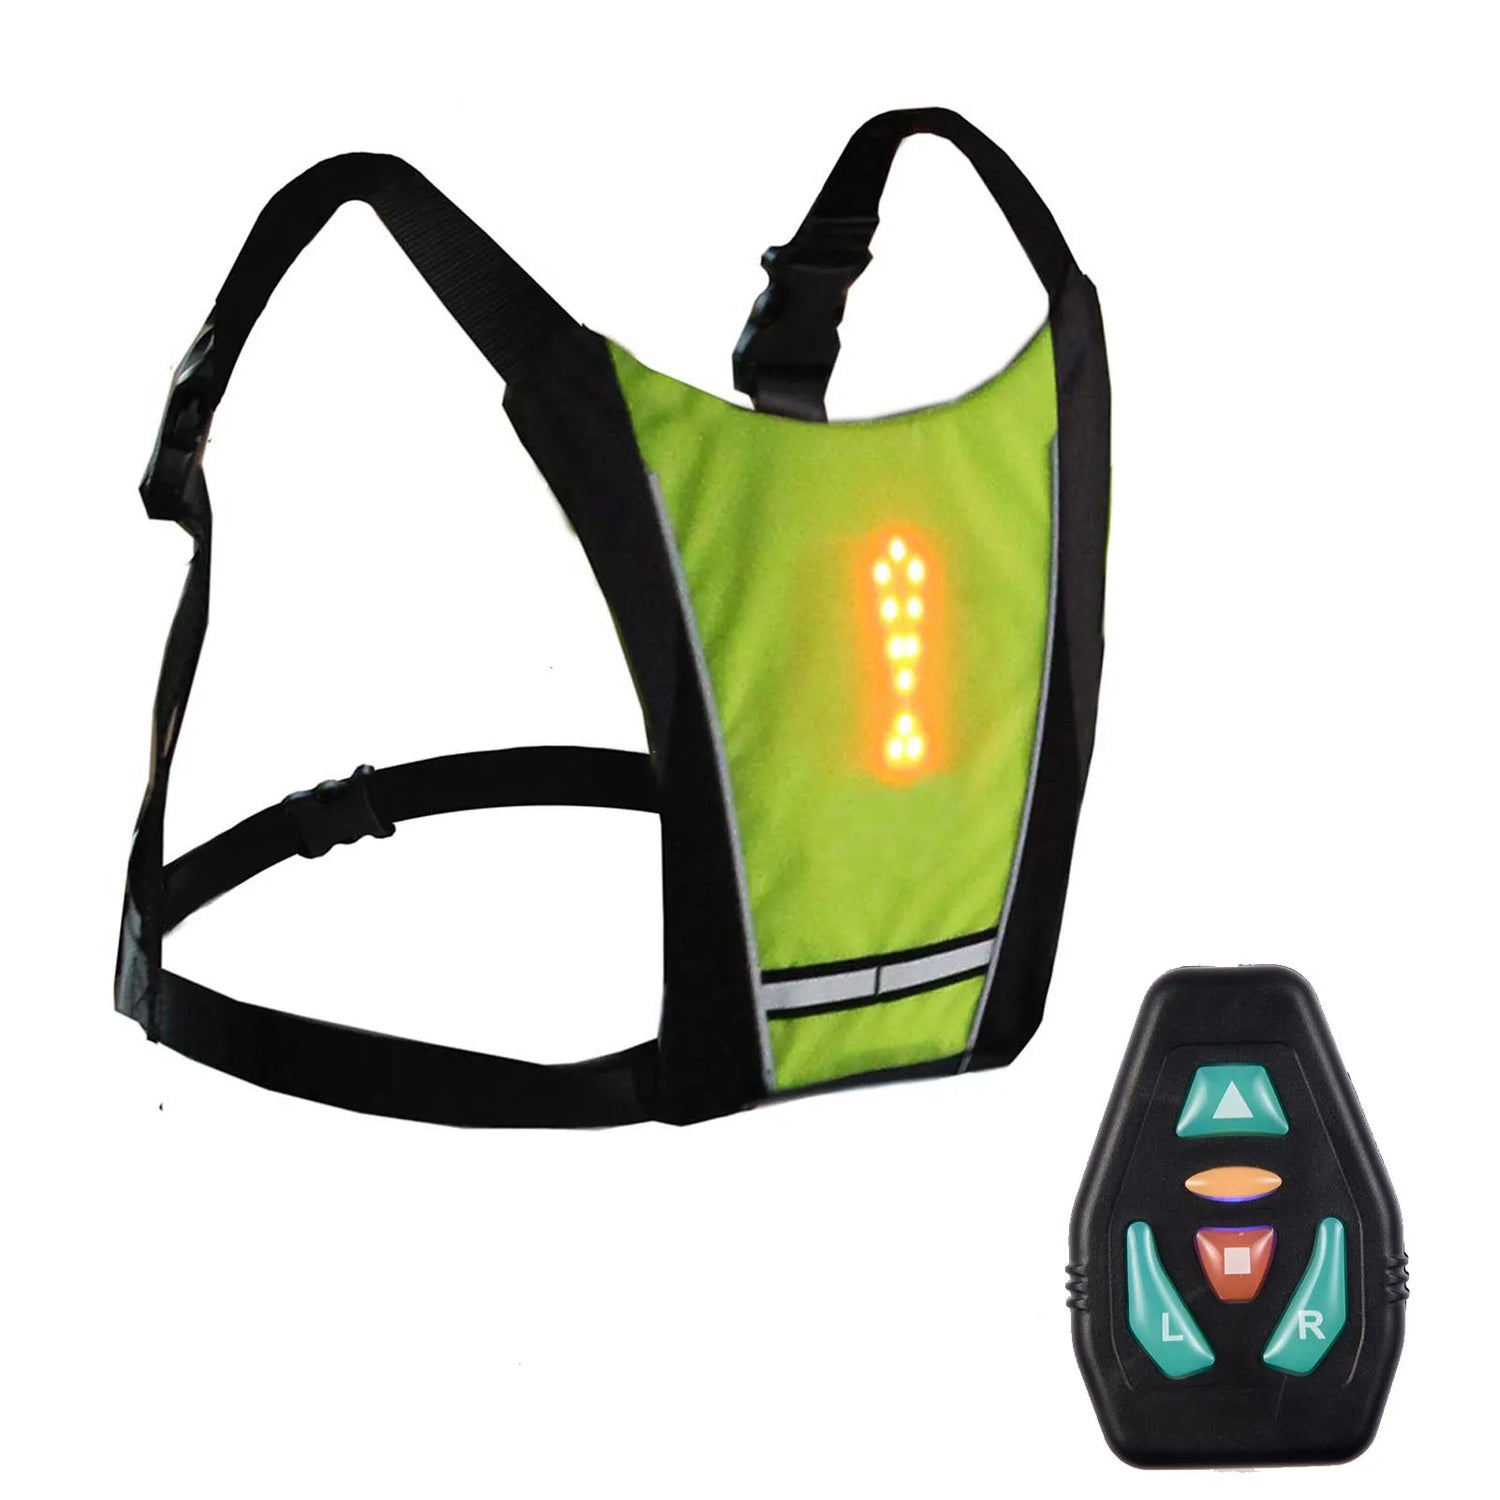 USB Rechargeable Sac a Dos Clignotant Velo, Gilet Velo Clignotant